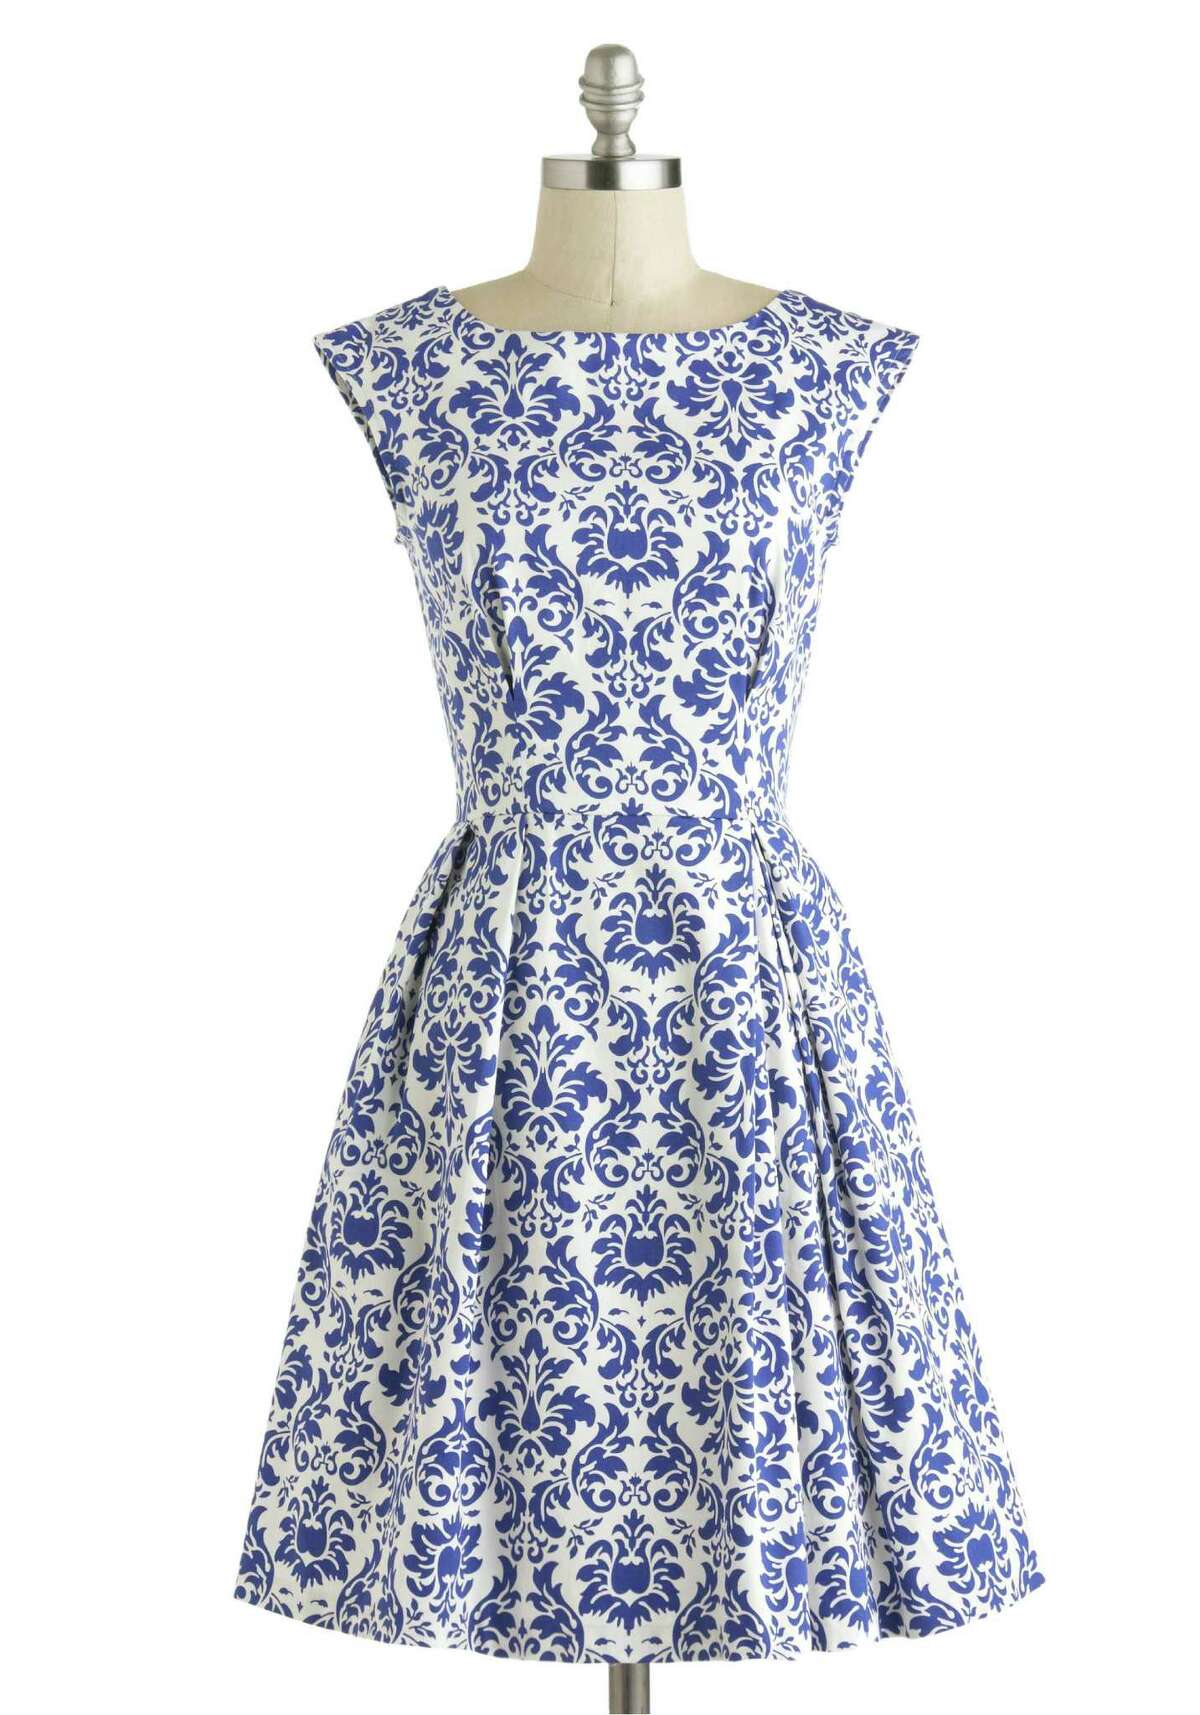 Go Dutch with Delft-inspired items this season